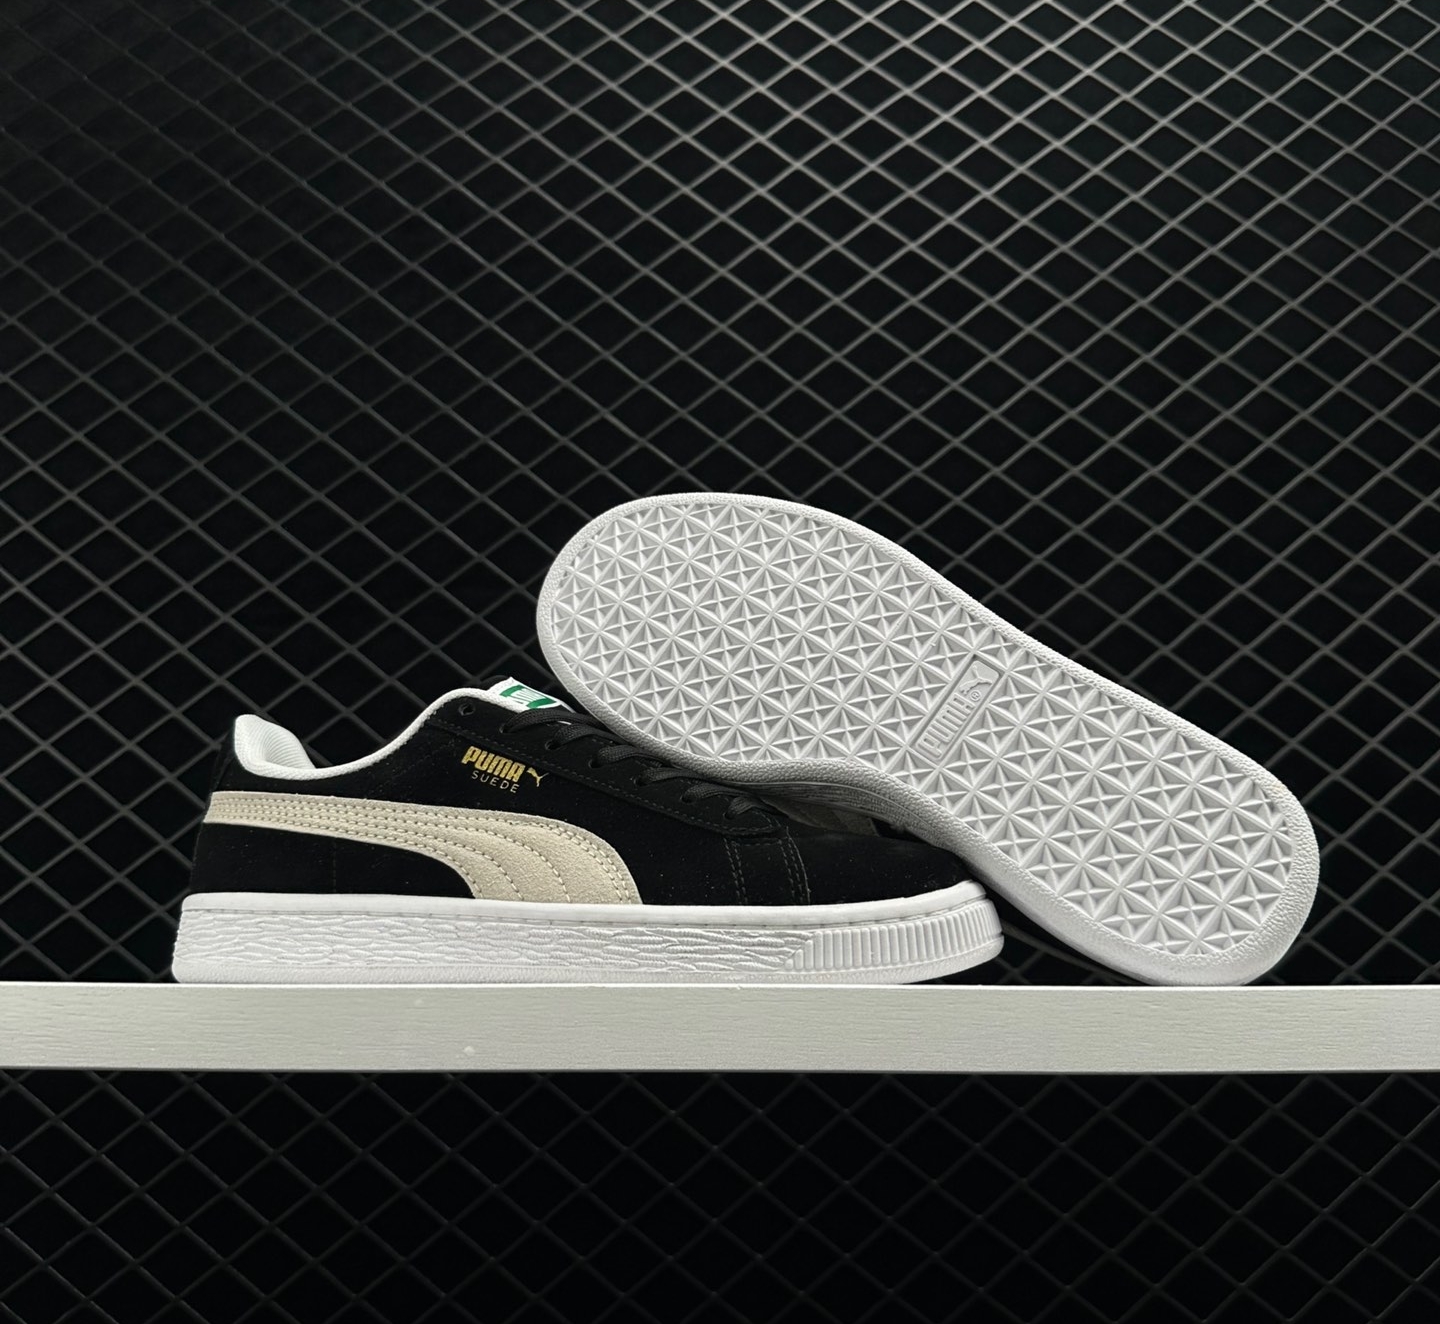 PUMA Suede Classic 21 'Black Khaki White' 374915 01 - Stylish and Versatile Sneakers for All Occasions!